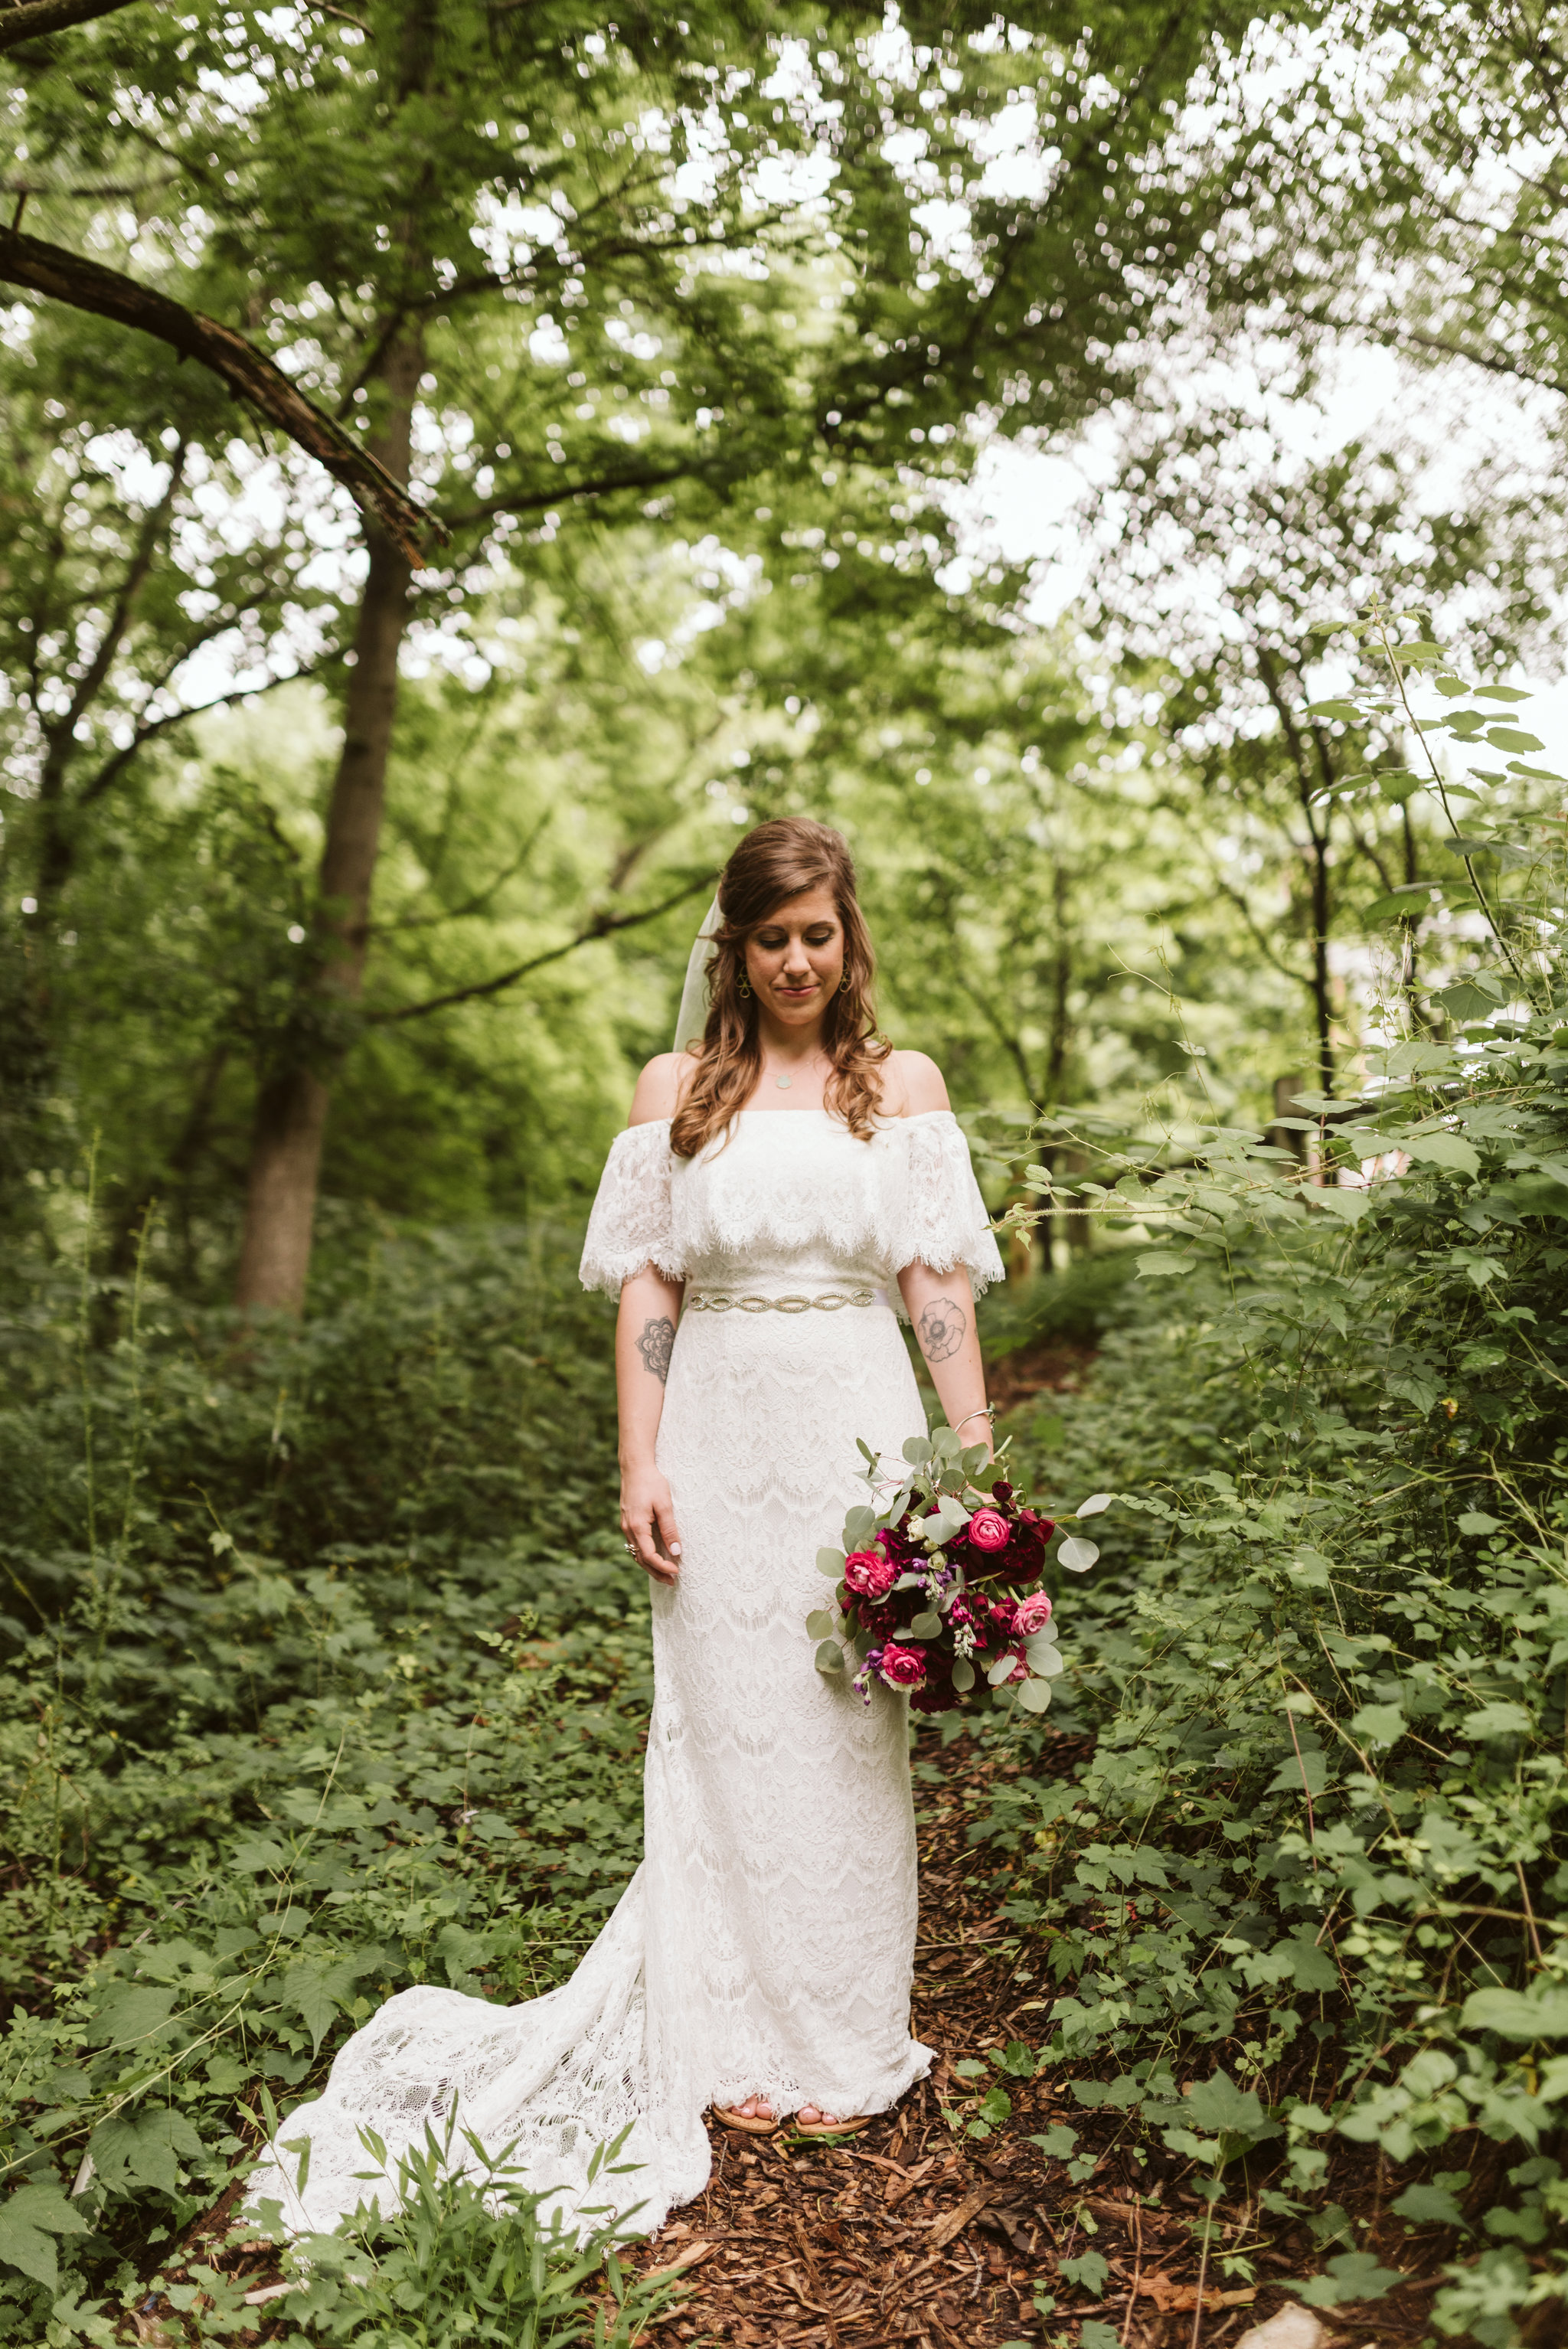  Annapolis, Quaker Wedding, Maryland Wedding Photographer, Intimate, Small Wedding, Vintage, DIY, Portrait of Bride Standing in the Woods, Lace Wedding Dress, Peonies and Eucalyptus  